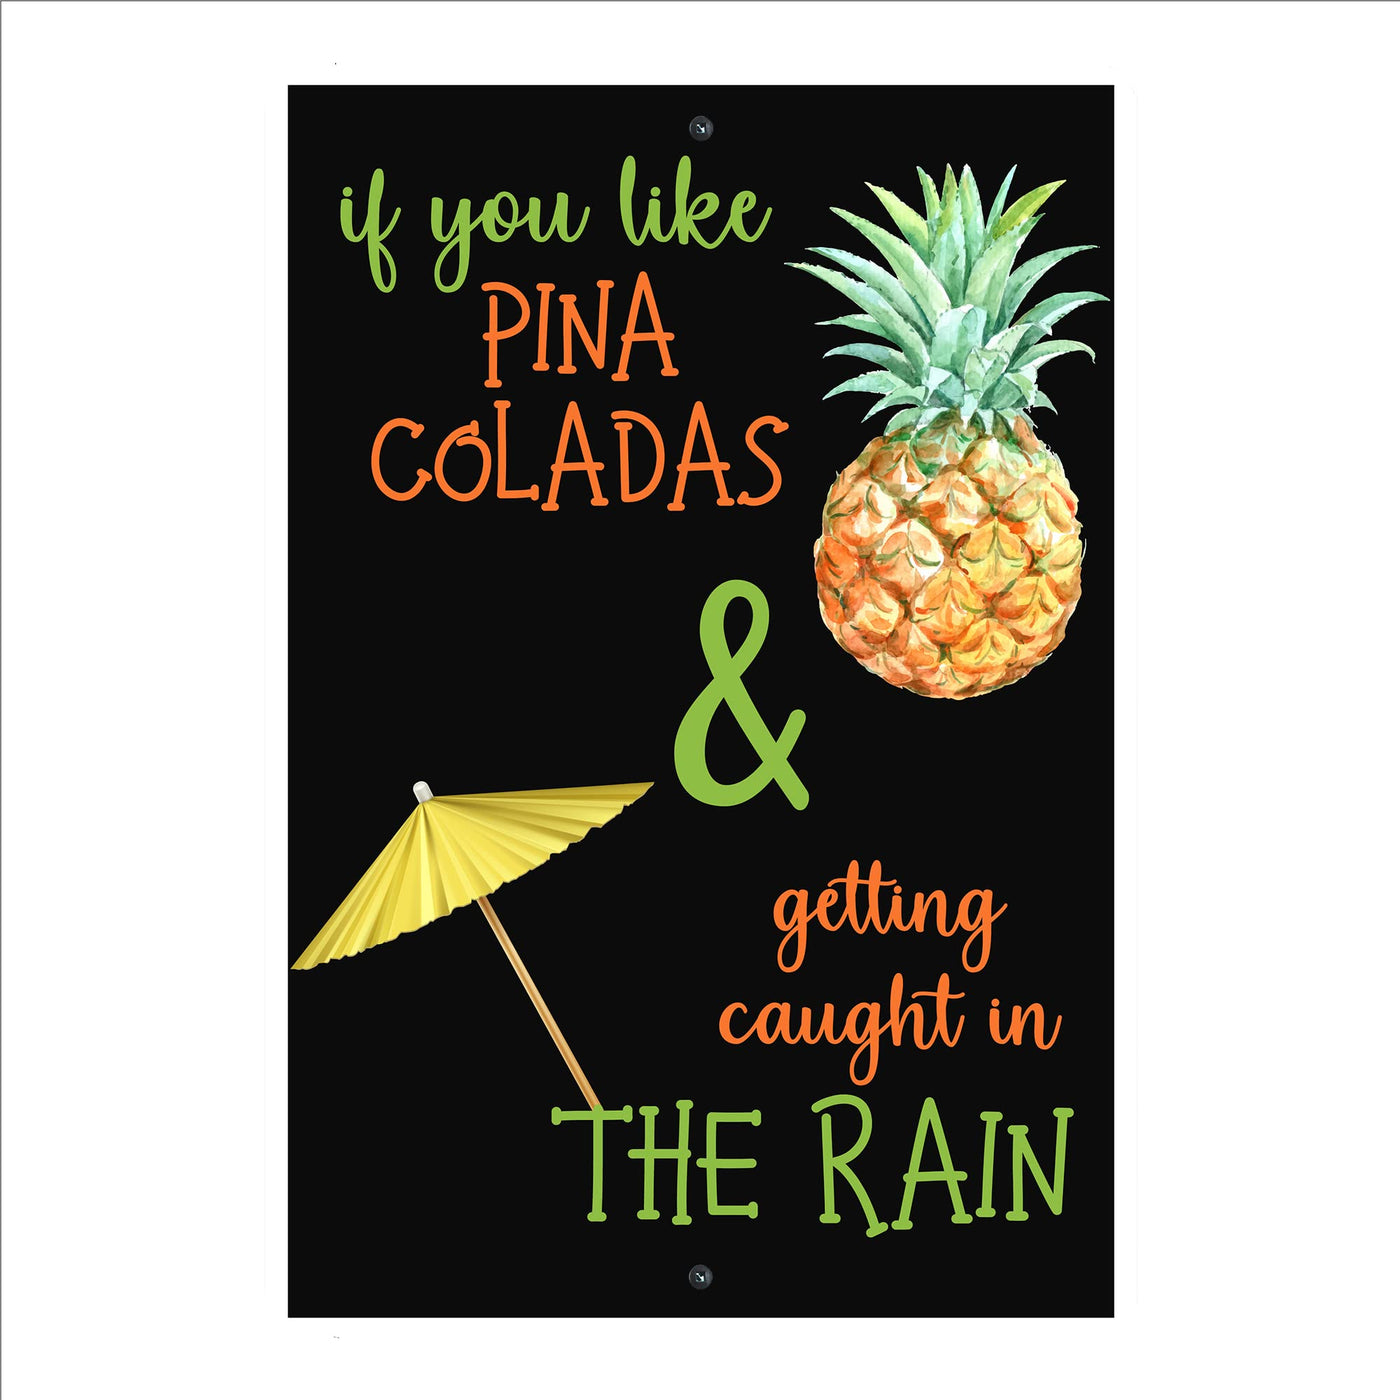 If You Like Pina Coladas Metal Wall Art Vintage Sign -8 x 12" Funny Retro Beer & Alcohol Beach Pineapple Sign. Tropical Song Art Tin Sign for Home Bar-Kitchen-Man Cave-Garage-Pub & Patio Decor!